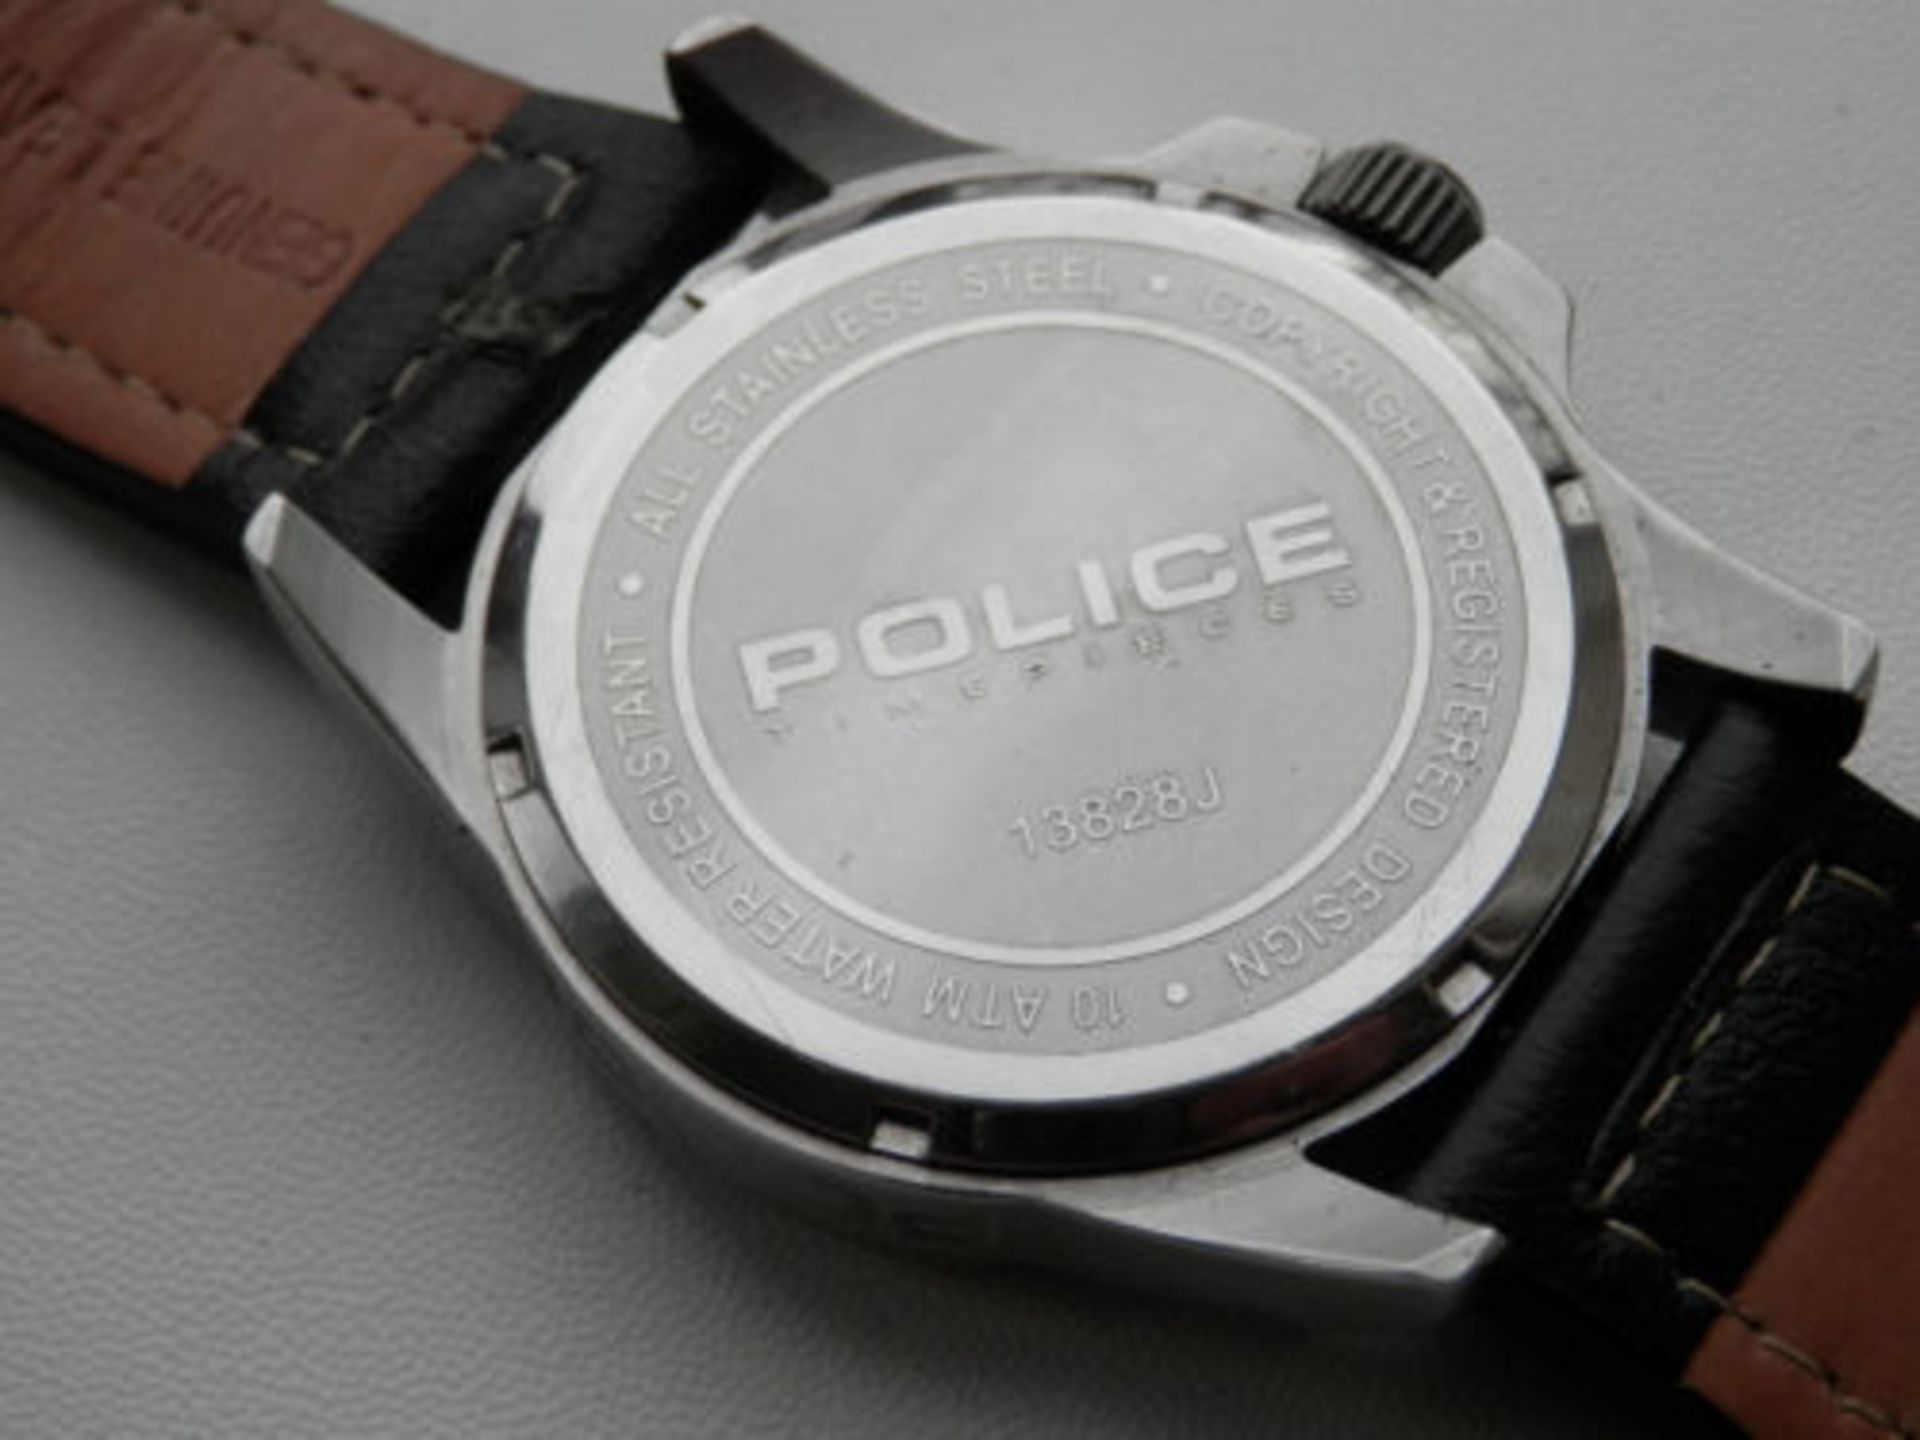 GORGEOUS LOOKING GENTS POLICE 48MM CHUNKY STAINLESS DATE WATCH, 100M WR RRP £110 - Image 6 of 10